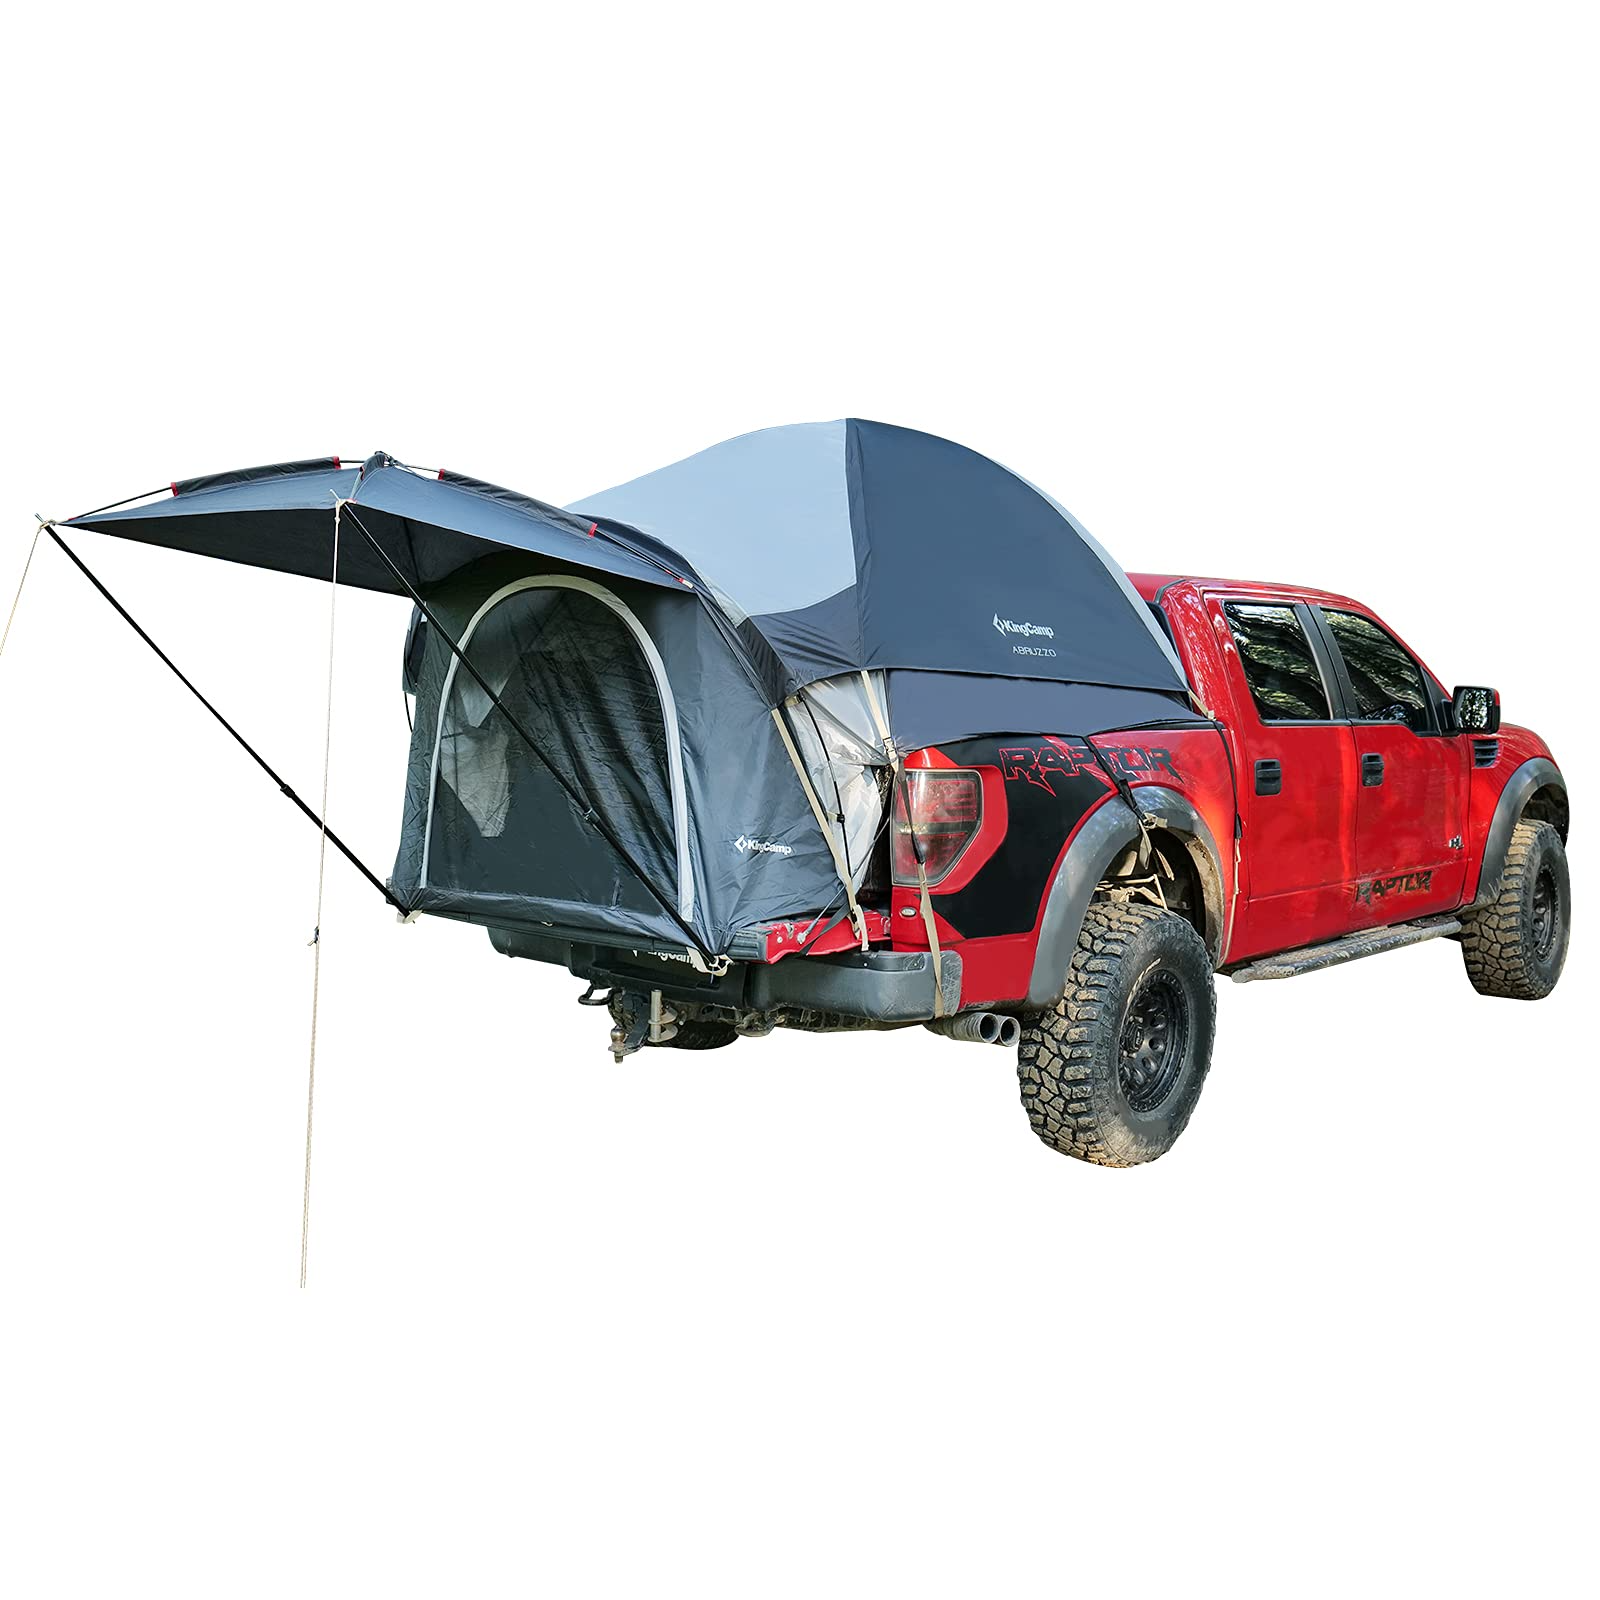 Buy Camping Square SUV Tent Online from KingCamp Outdoors